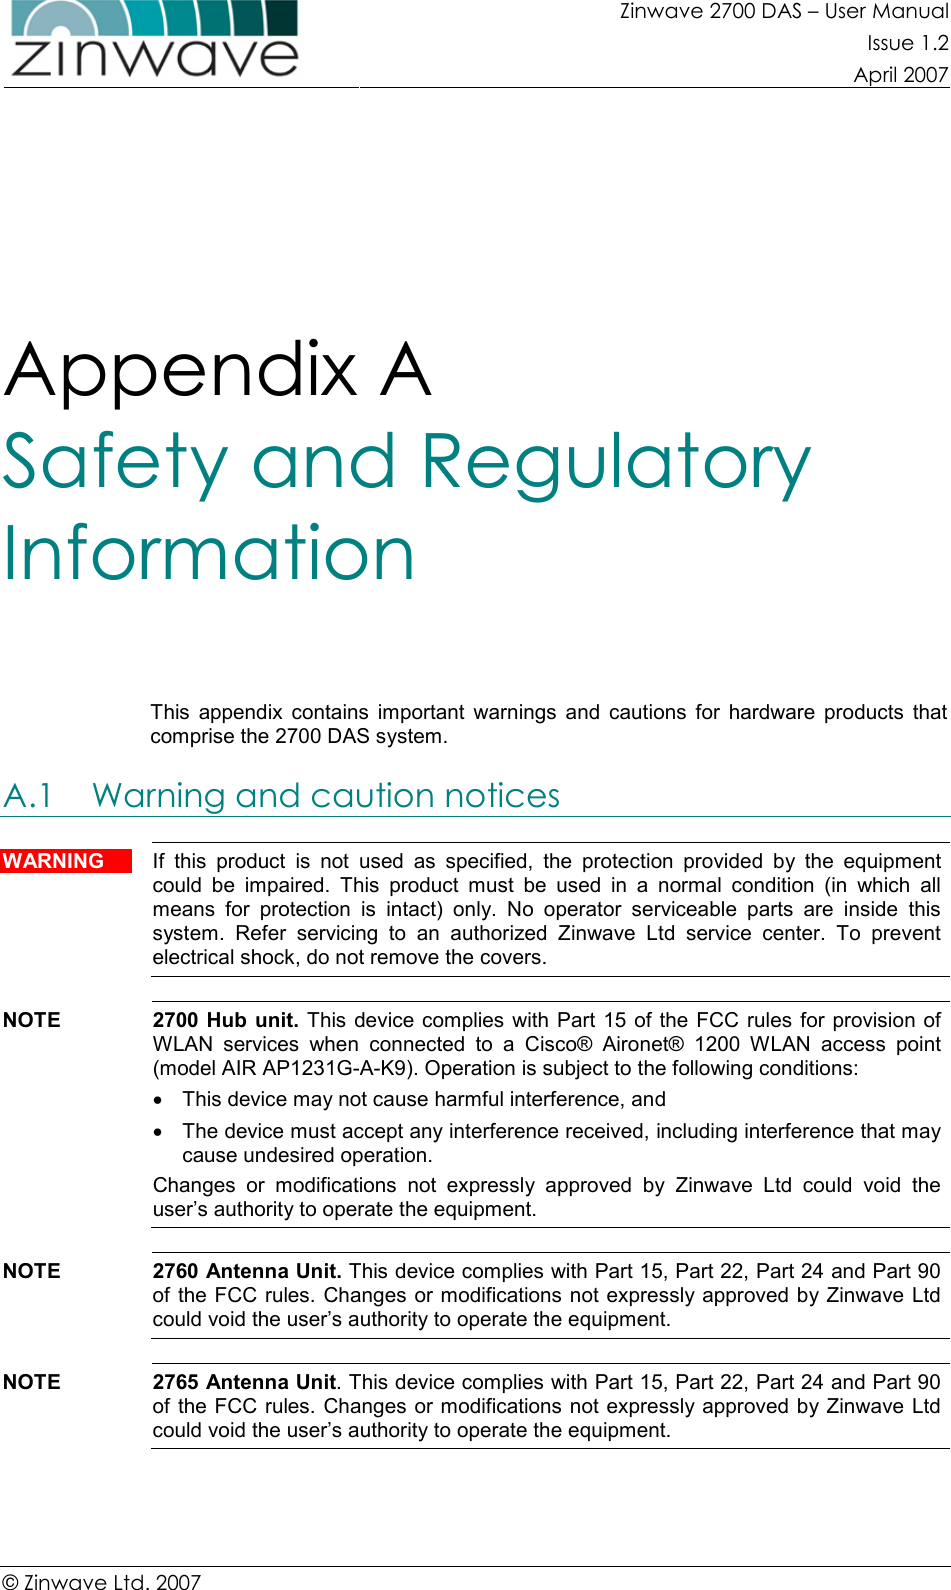 Zinwave 2700 DAS – User Manual Issue 1.2  April 2007  © Zinwave Ltd. 2007  Appendix A  Safety and Regulatory Information  This  appendix  contains  important  warnings  and  cautions  for  hardware  products  that comprise the 2700 DAS system. A.1 Warning and caution notices  WARNING  If  this  product  is  not  used  as  specified,  the  protection  provided  by  the  equipment could  be  impaired.  This  product  must  be  used  in  a  normal  condition  (in  which  all means  for  protection  is  intact)  only.  No  operator  serviceable  parts  are  inside  this system.  Refer  servicing  to  an  authorized  Zinwave  Ltd  service  center.  To  prevent electrical shock, do not remove the covers.  NOTE  2700  Hub  unit.  This device complies with Part 15 of the FCC rules for provision of WLAN  services  when  connected  to  a  Cisco®  Aironet®  1200  WLAN  access  point (model AIR AP1231G-A-K9). Operation is subject to the following conditions: •  This device may not cause harmful interference, and •  The device must accept any interference received, including interference that may cause undesired operation. Changes  or  modifications  not  expressly  approved  by  Zinwave  Ltd  could  void  the user’s authority to operate the equipment.  NOTE  2760 Antenna Unit. This device complies with Part 15, Part 22, Part 24 and Part 90 of the FCC rules. Changes or modifications not expressly approved by Zinwave Ltd could void the user’s authority to operate the equipment.  NOTE  2765 Antenna Unit. This device complies with Part 15, Part 22, Part 24 and Part 90 of the FCC rules. Changes or modifications not expressly approved by Zinwave Ltd could void the user’s authority to operate the equipment.  